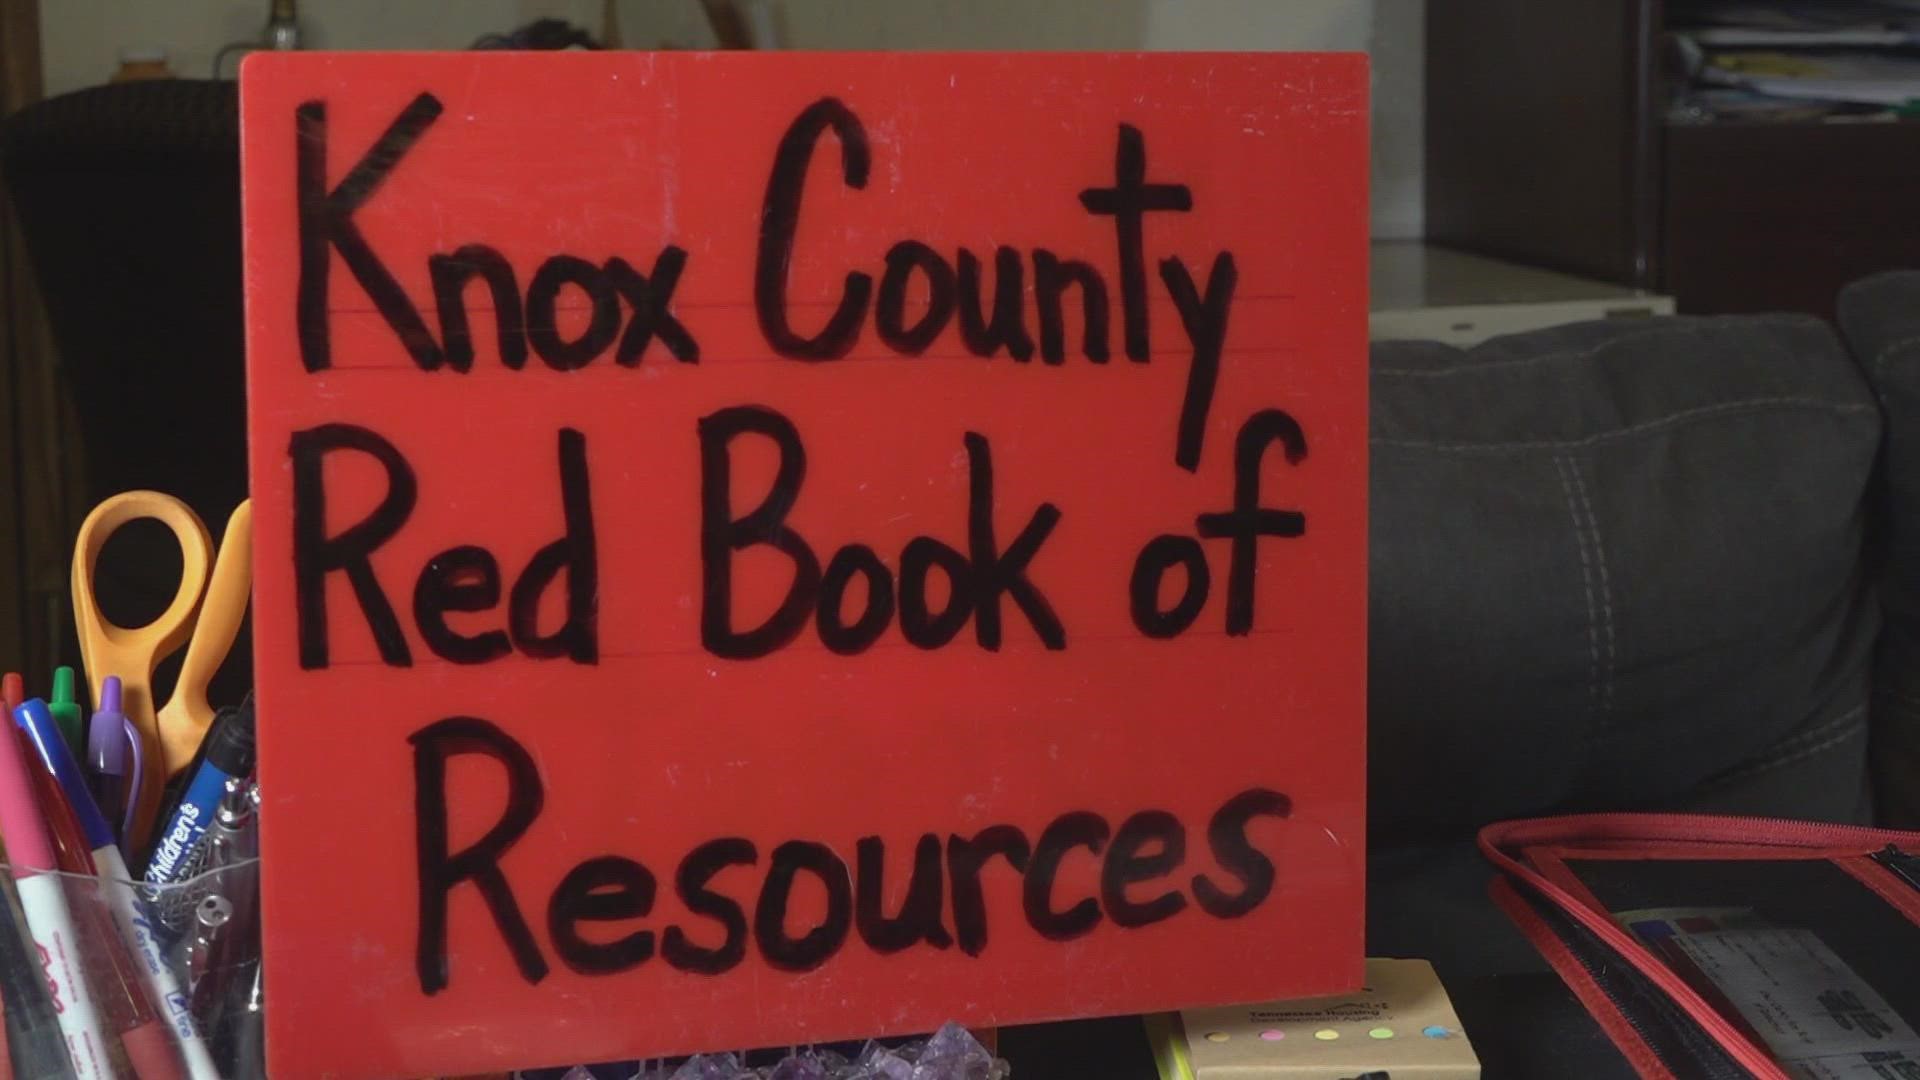 The Knox County Red Book of Resources has been the pet project of a Corryton woman for the last three years.